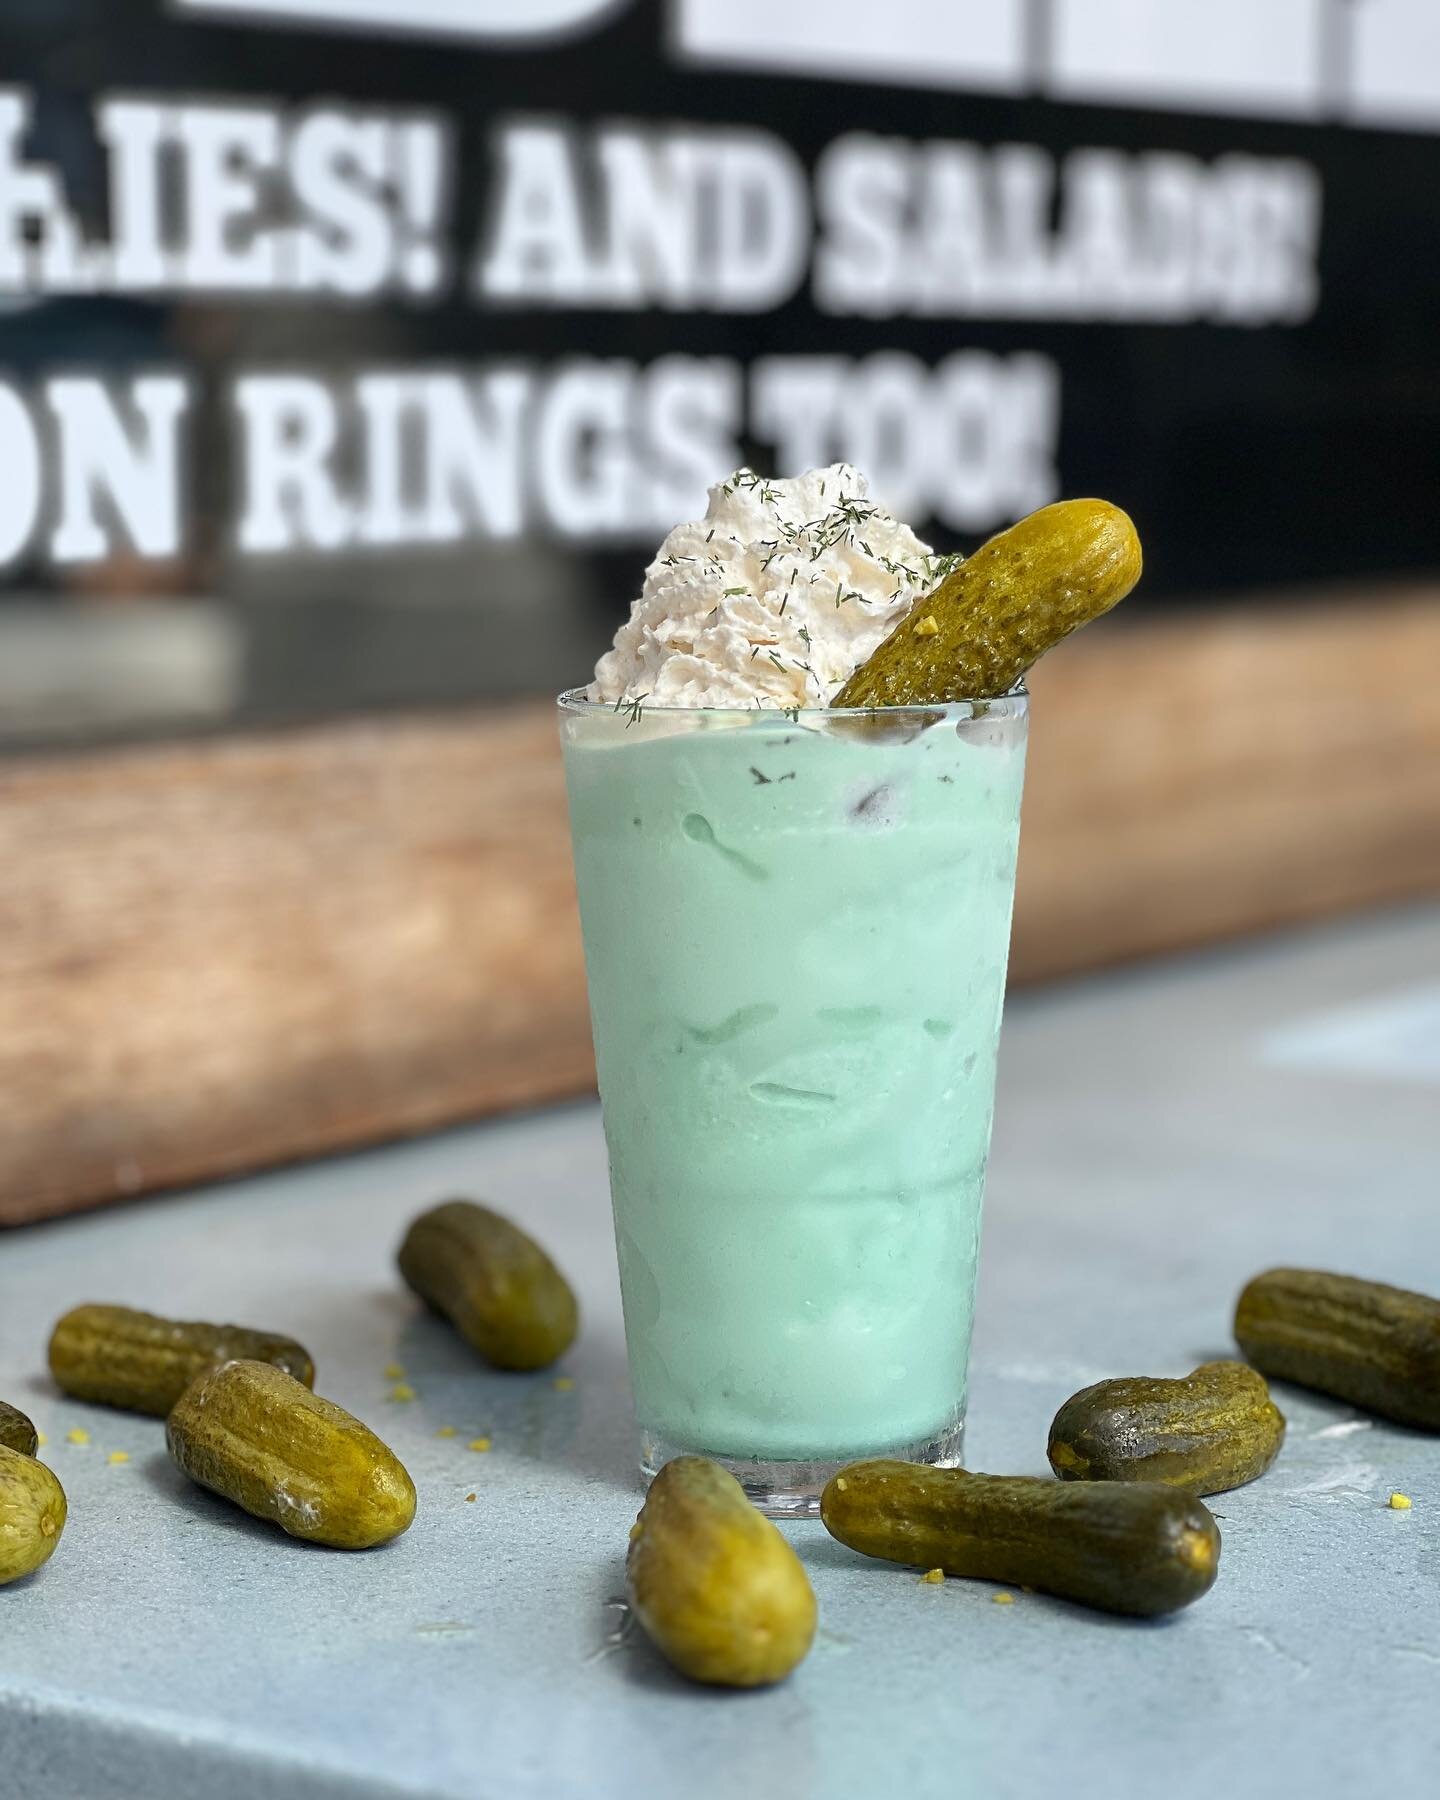 No pranks, just pickles. Happy April fools day, ya punks. 

Don&rsquo;t dilly dally, available in-store today only! (Seriously, come get one.)